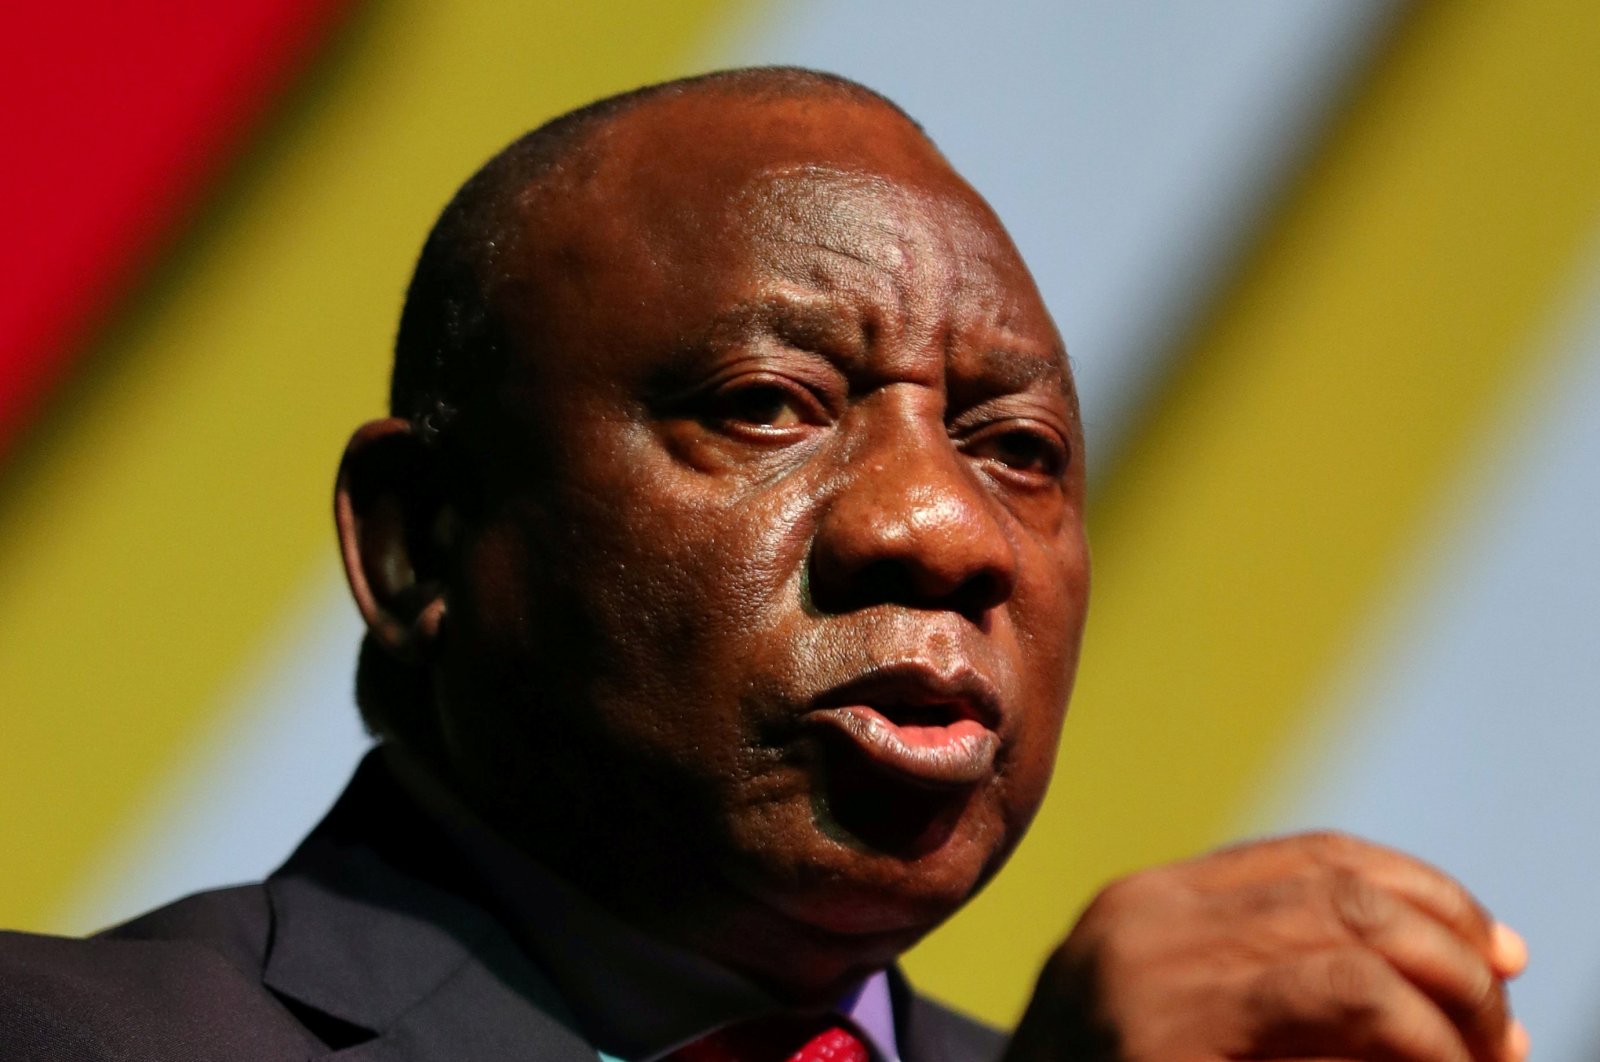 South African President Cyril Ramaphosa gestures as he delivers the opening address during the 3rd South Africa Investment Conference at the Sandton Convention Centre, in Sandton, South Africa, Nov. 18, 2020. (REUTERS)